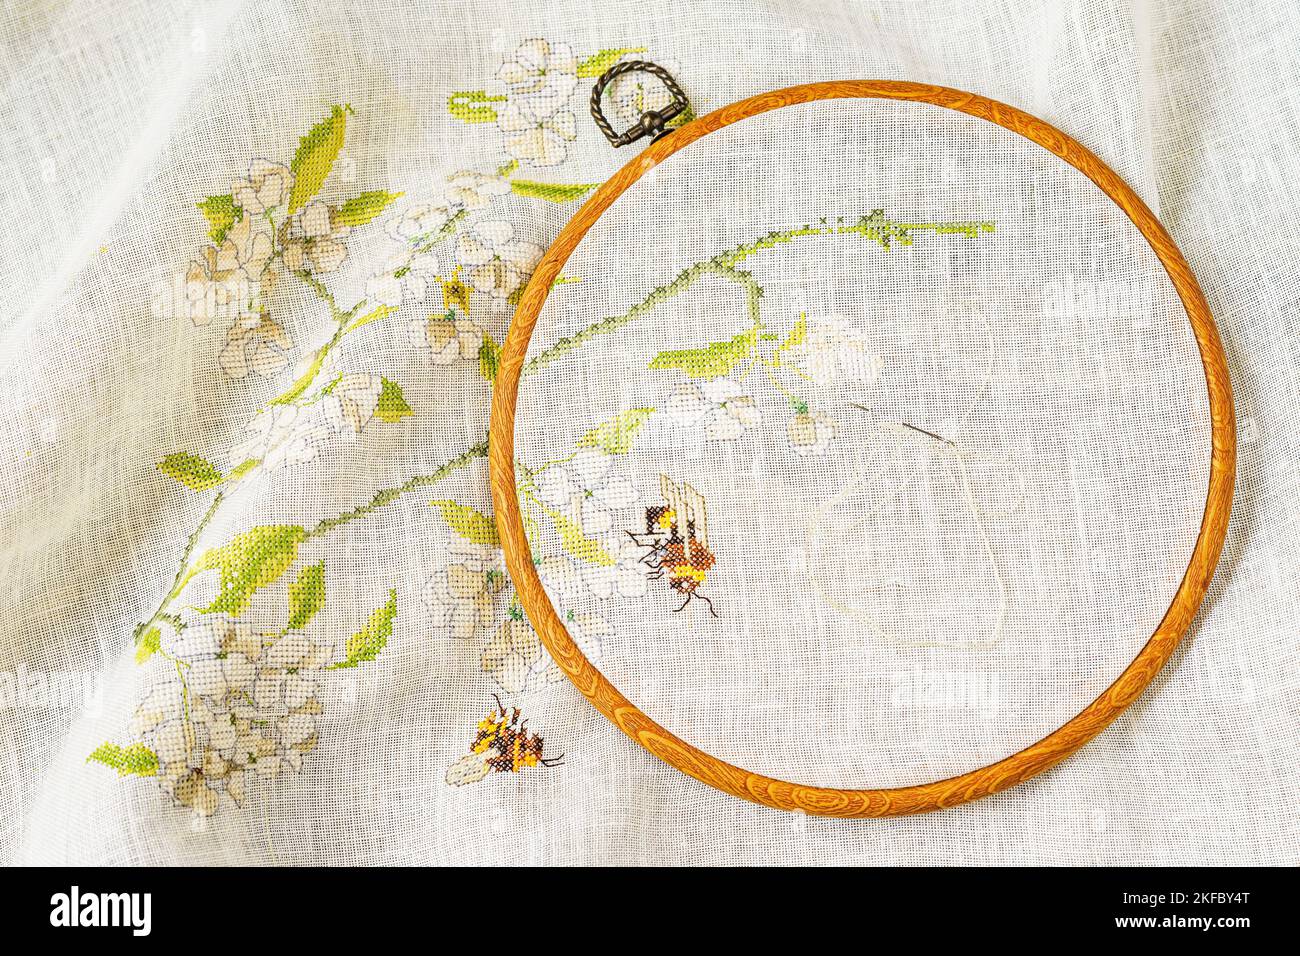 Embroidery hoop with fabric, with floral summer pattern on canvas closeup. Concept handmade hobby Stock Photo